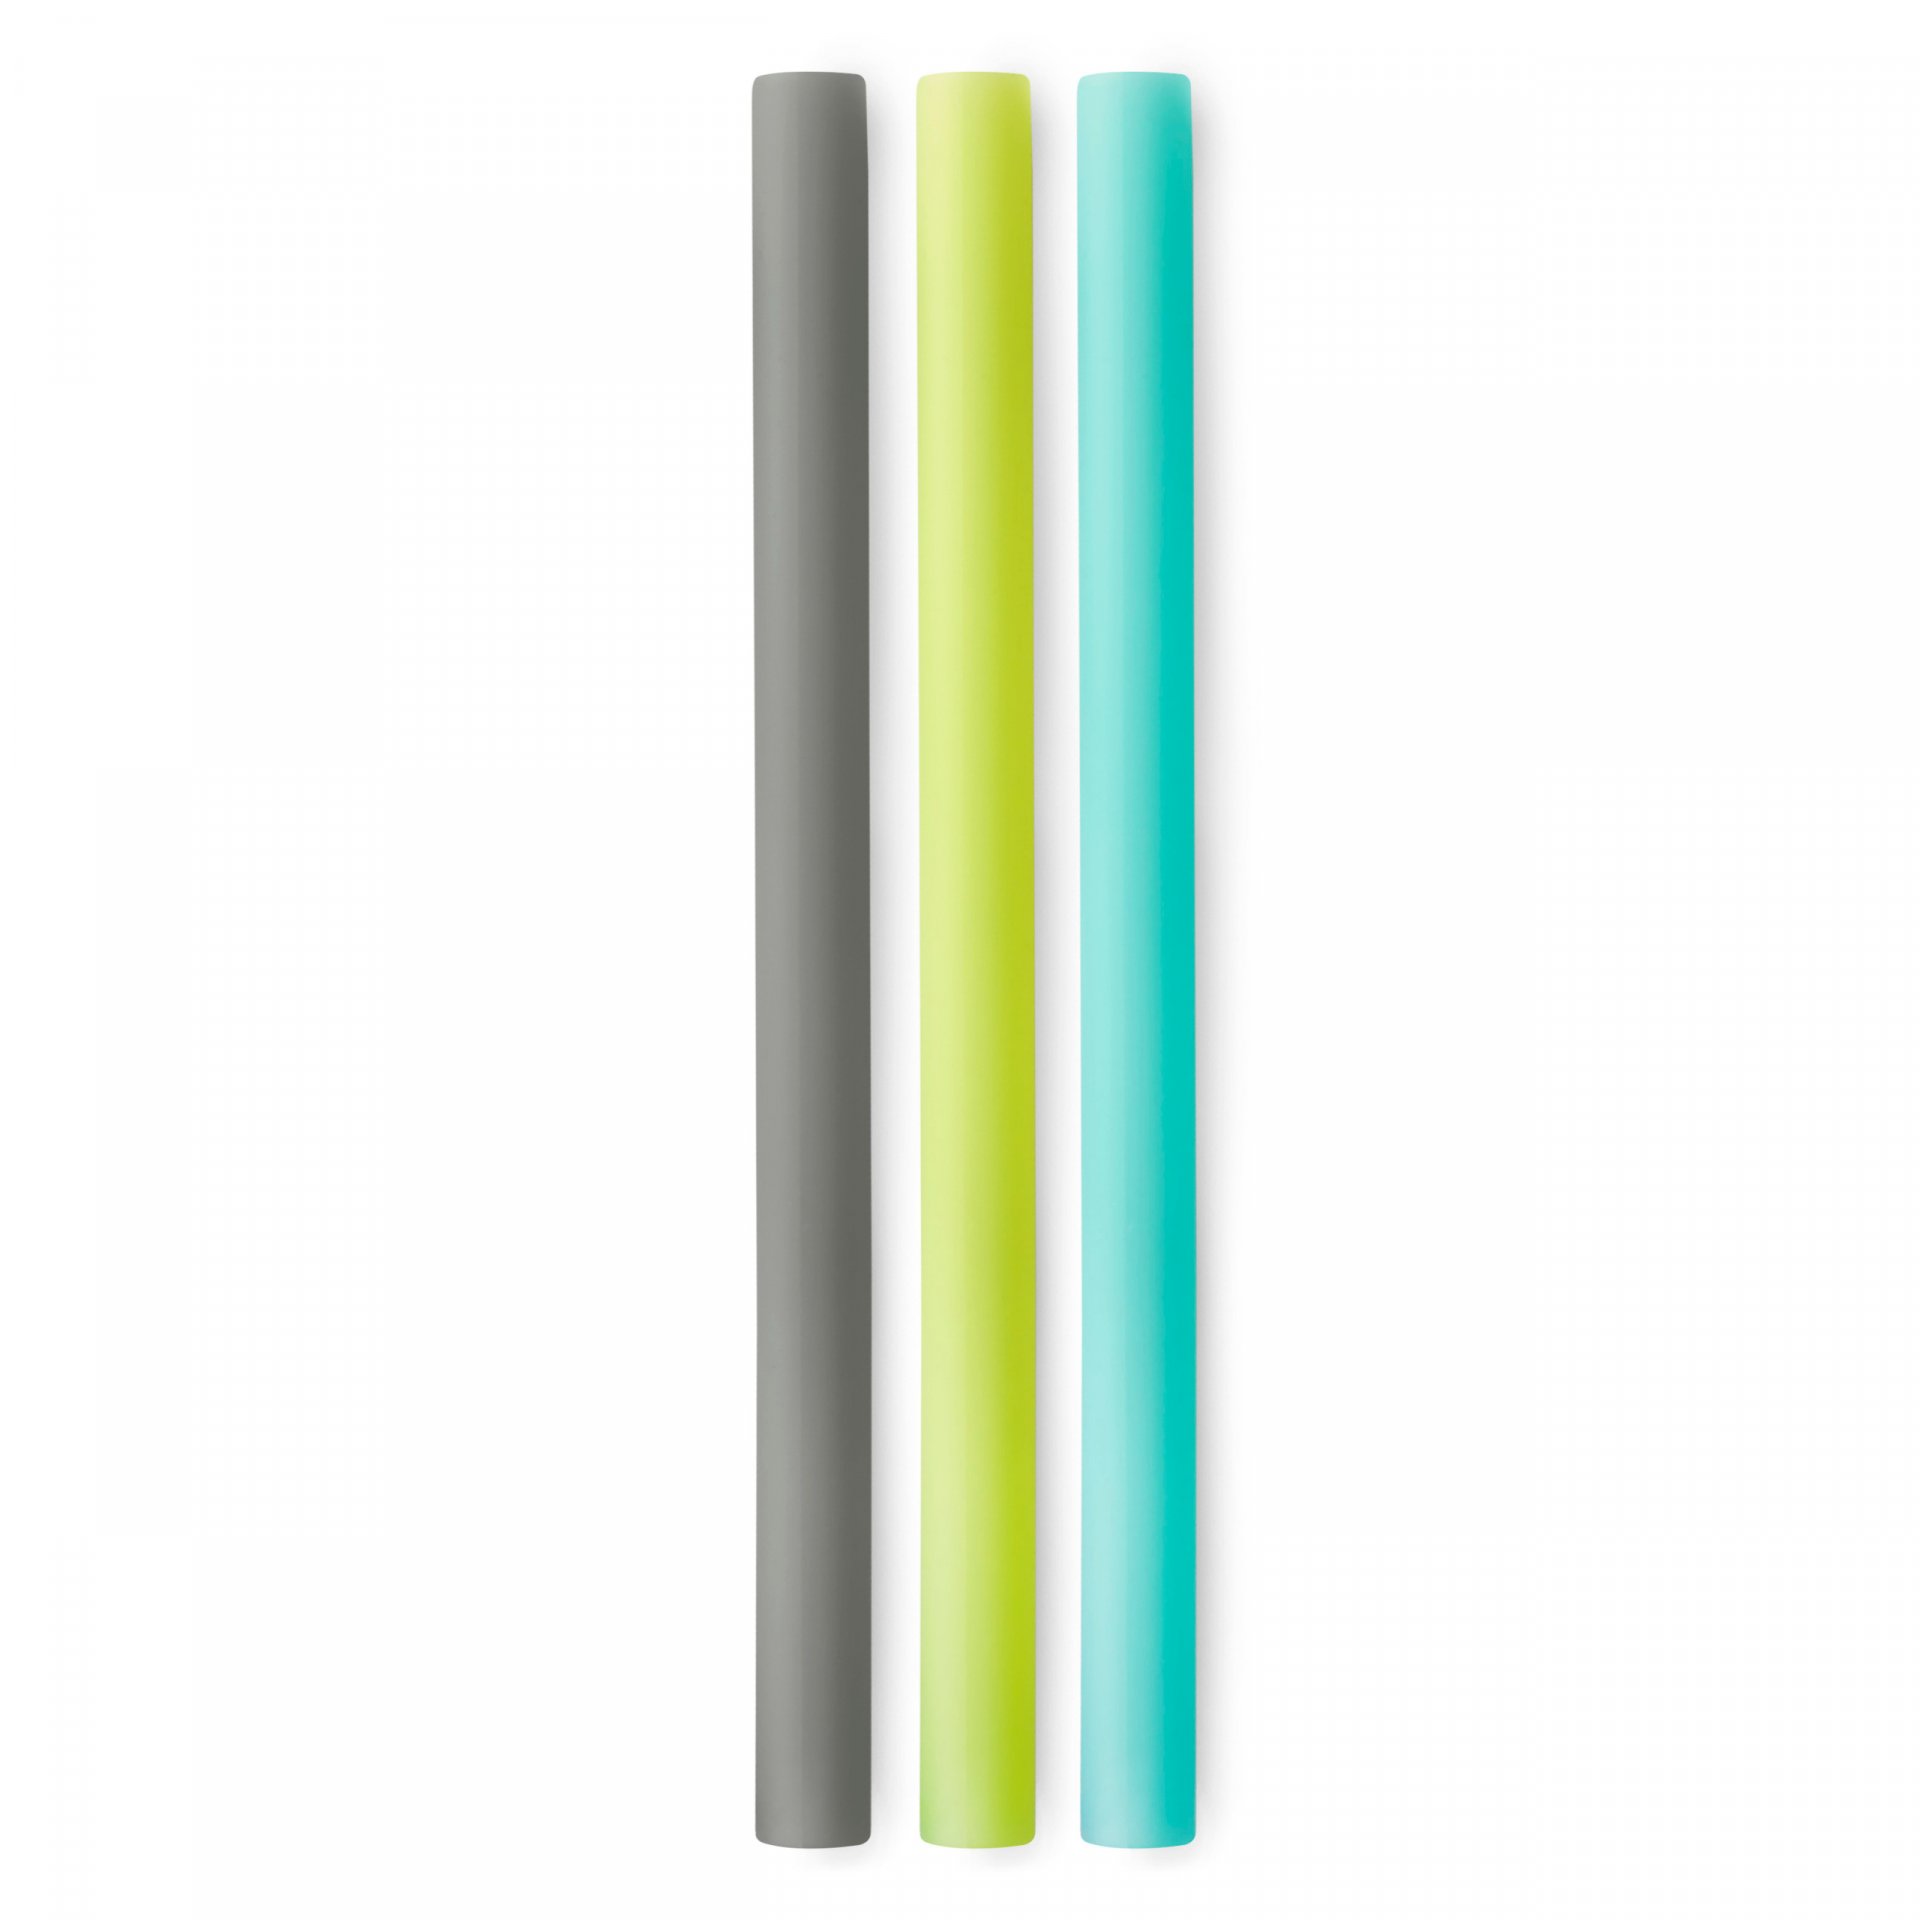 EXTRA WIDE REUSABLE SILICONE BOBA STRAW 3PACK (SEA/FOG/LIME)